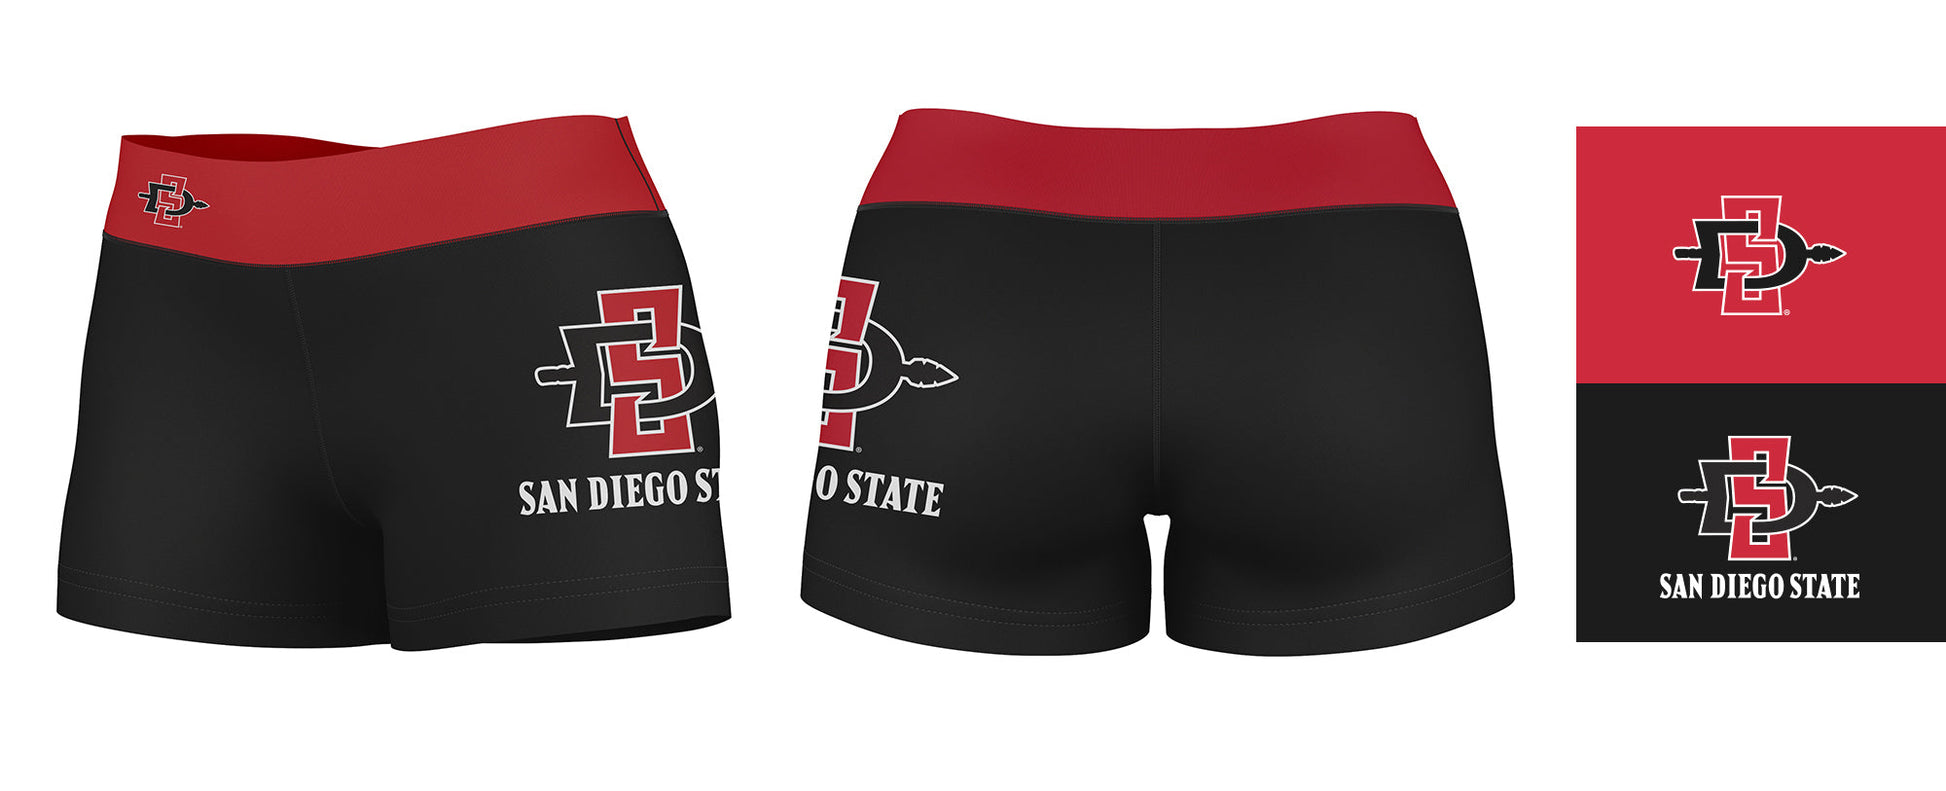 San Diego State Aztecs SDSU Logo on Thigh and Waistband Black and Red Women Yoga Booty Workout Shorts 3.75 Inseam" - Vive La F̻te - Online Apparel Store